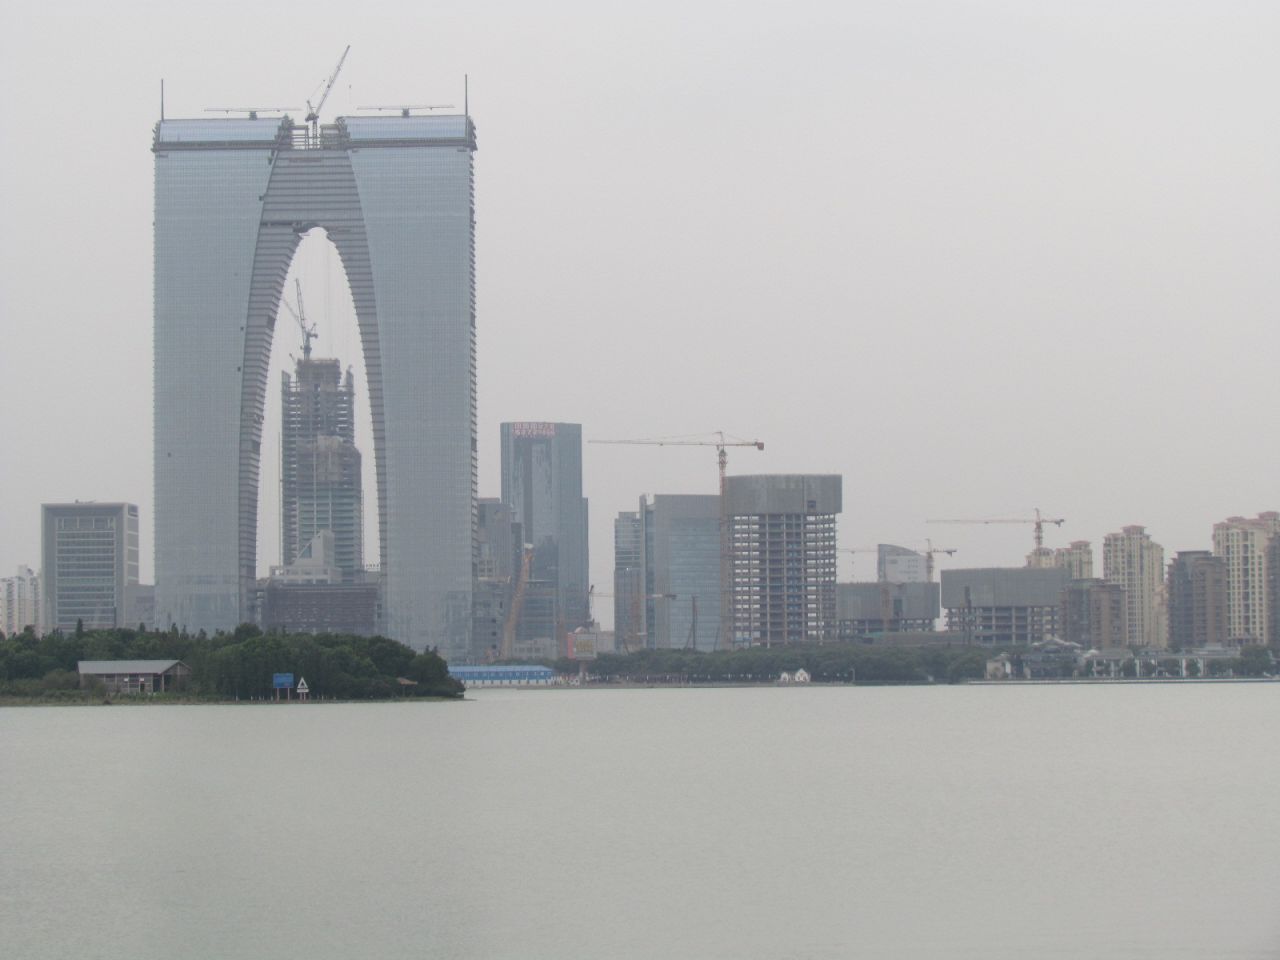 Suzhou's Gate to the East skyscraper pictured during construction in 2014.